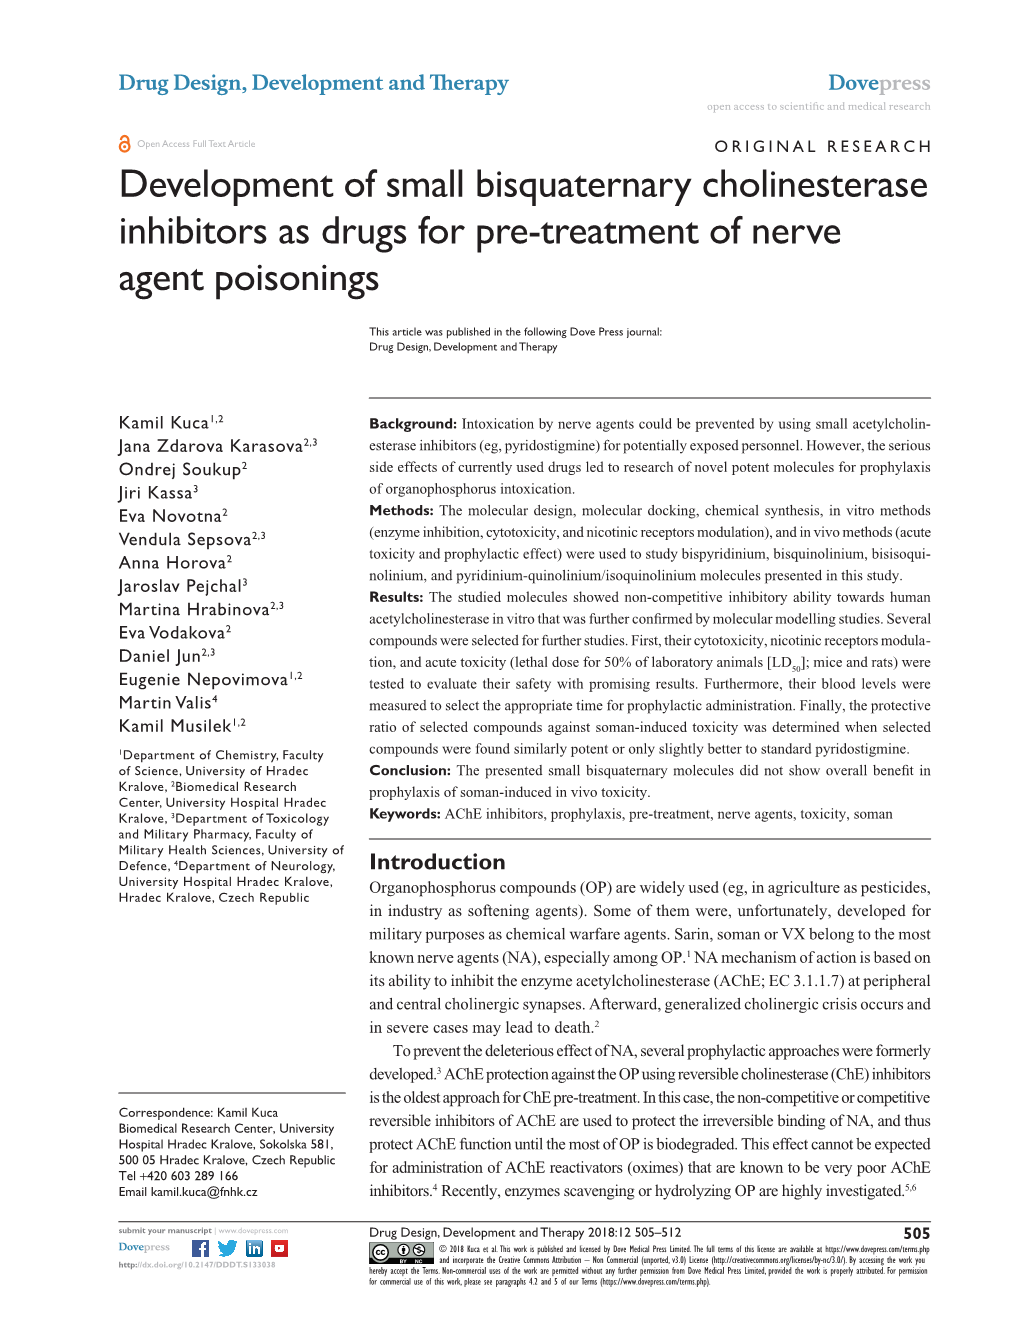 Development of Small Bisquaternary Cholinesterase Inhibitors As Drugs for Pre-Treatment of Nerve Agent Poisonings